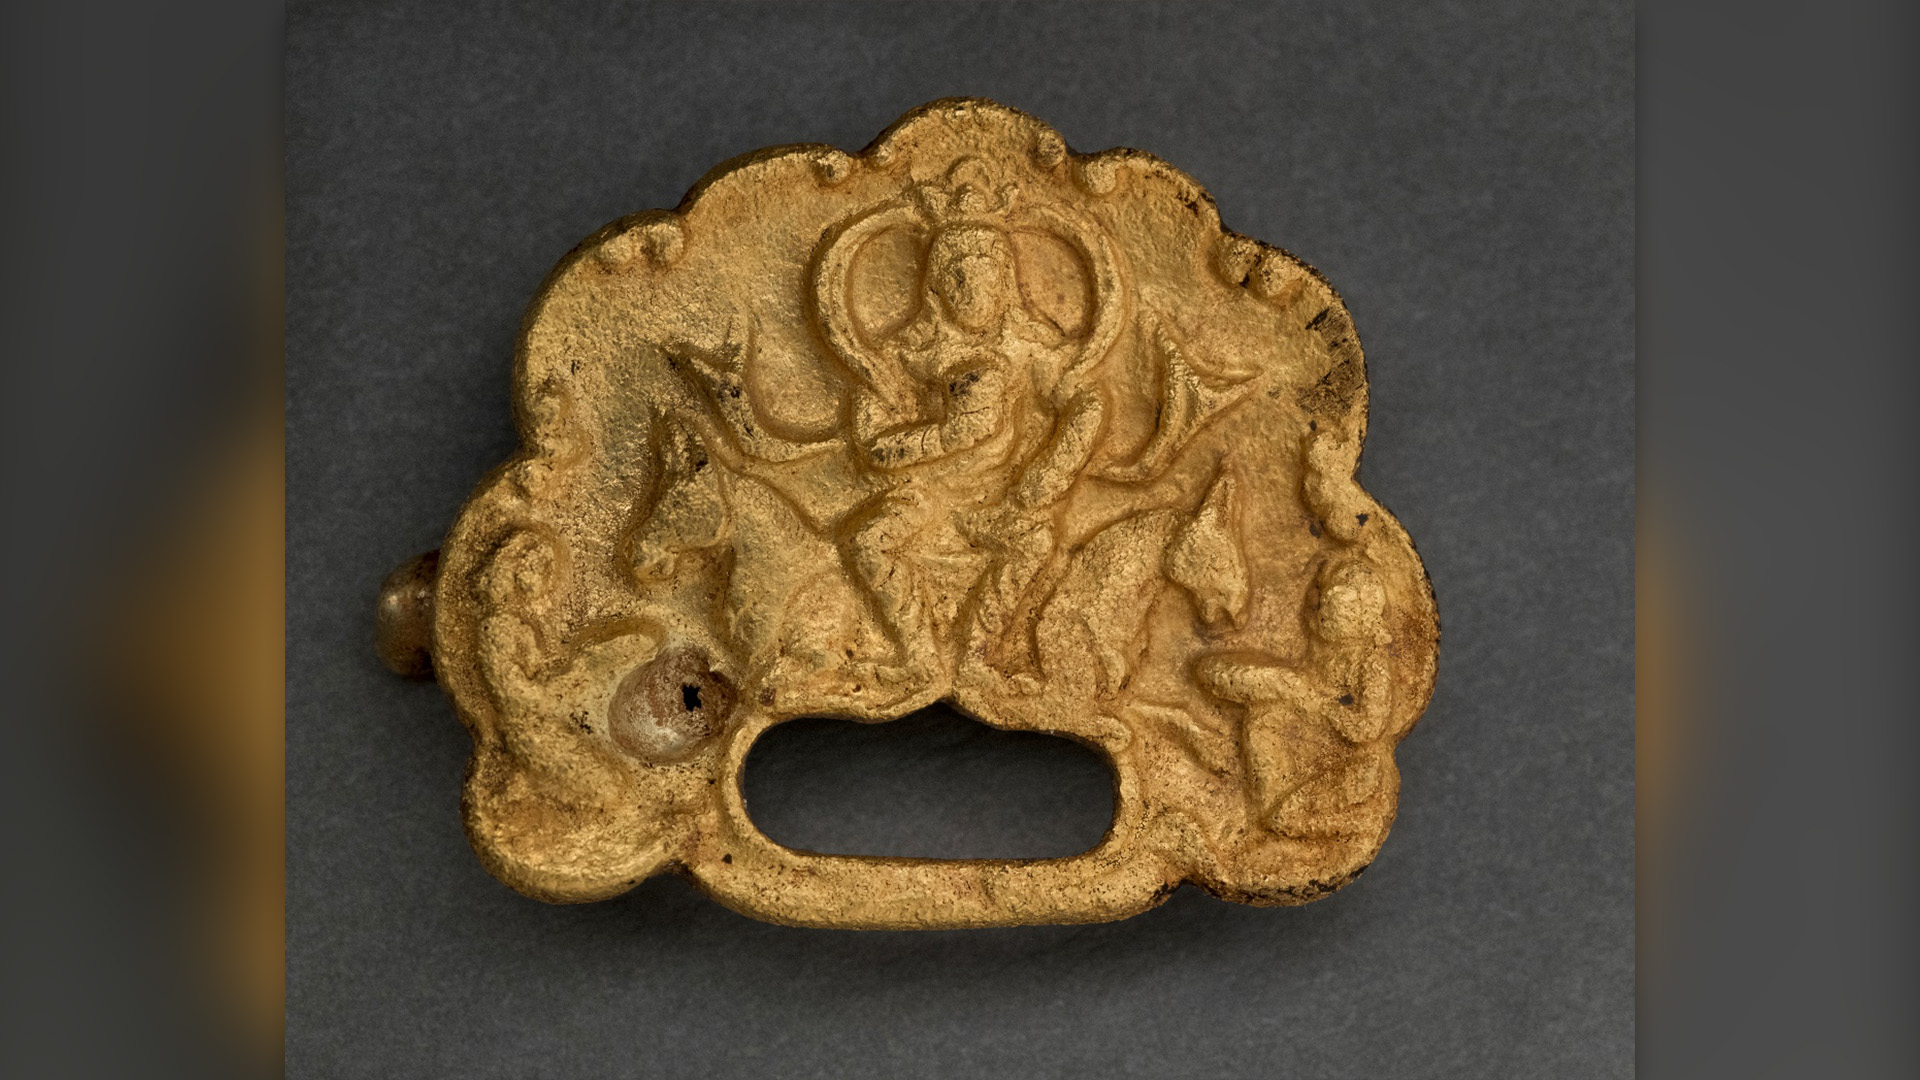 1,500-year-old gold buckles depicting ruler 'majestically sitting